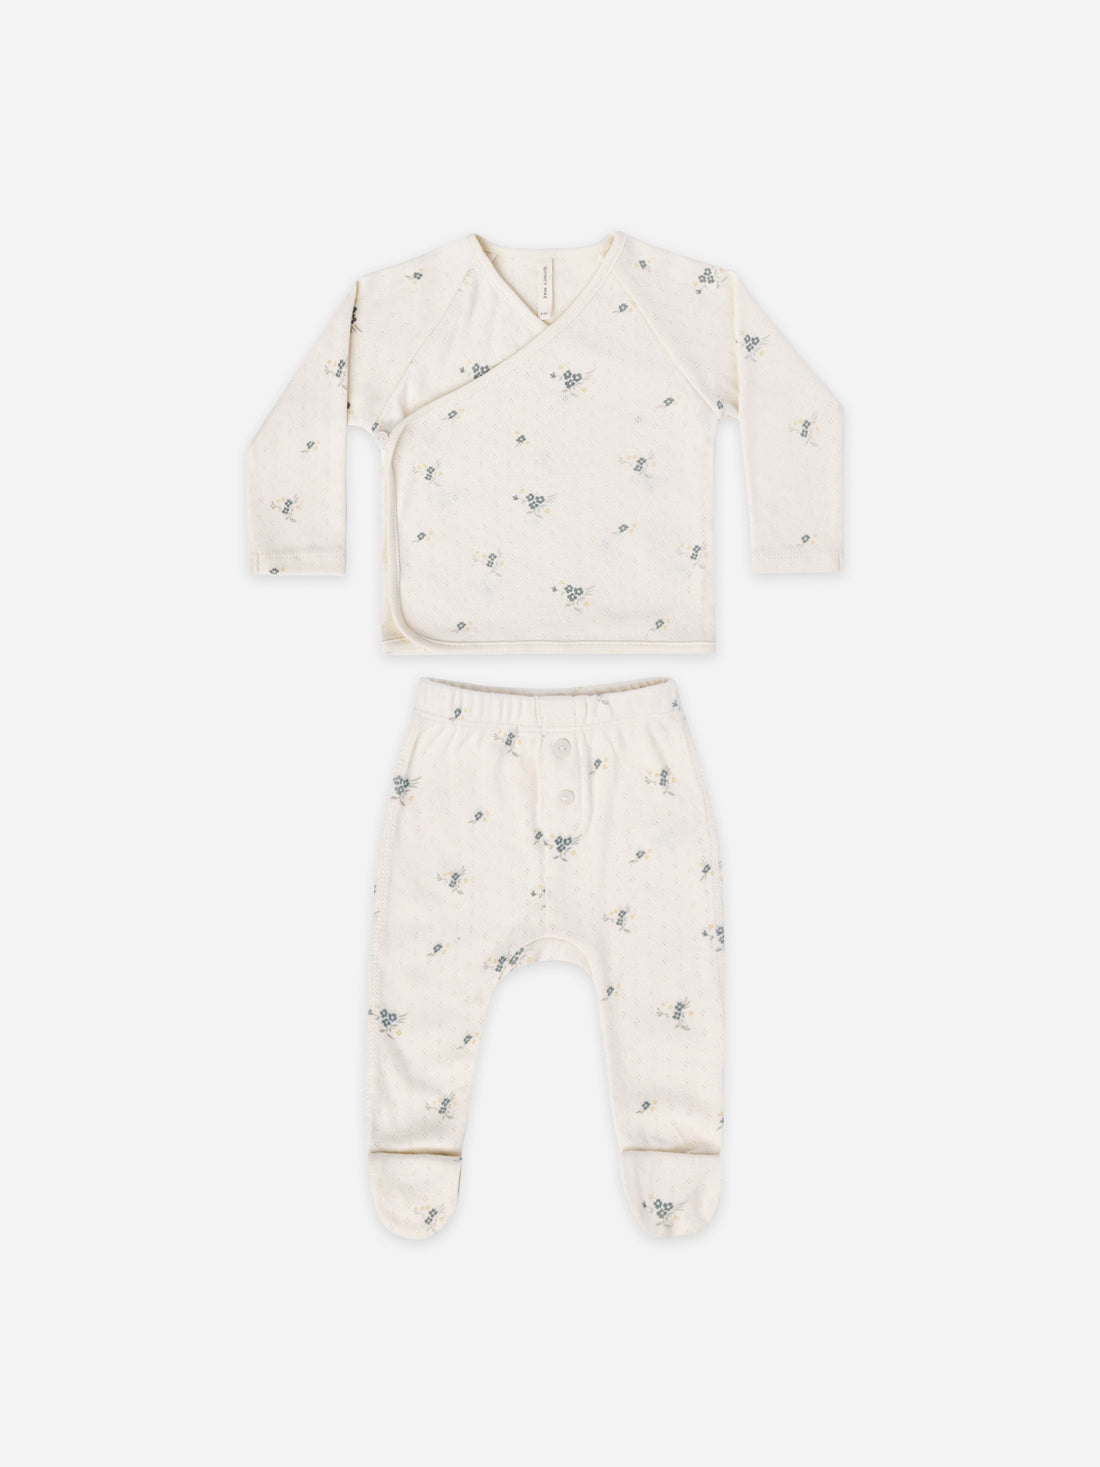 Pointelle Wrap Top + Footed Pant Set - Ditsy Ocean